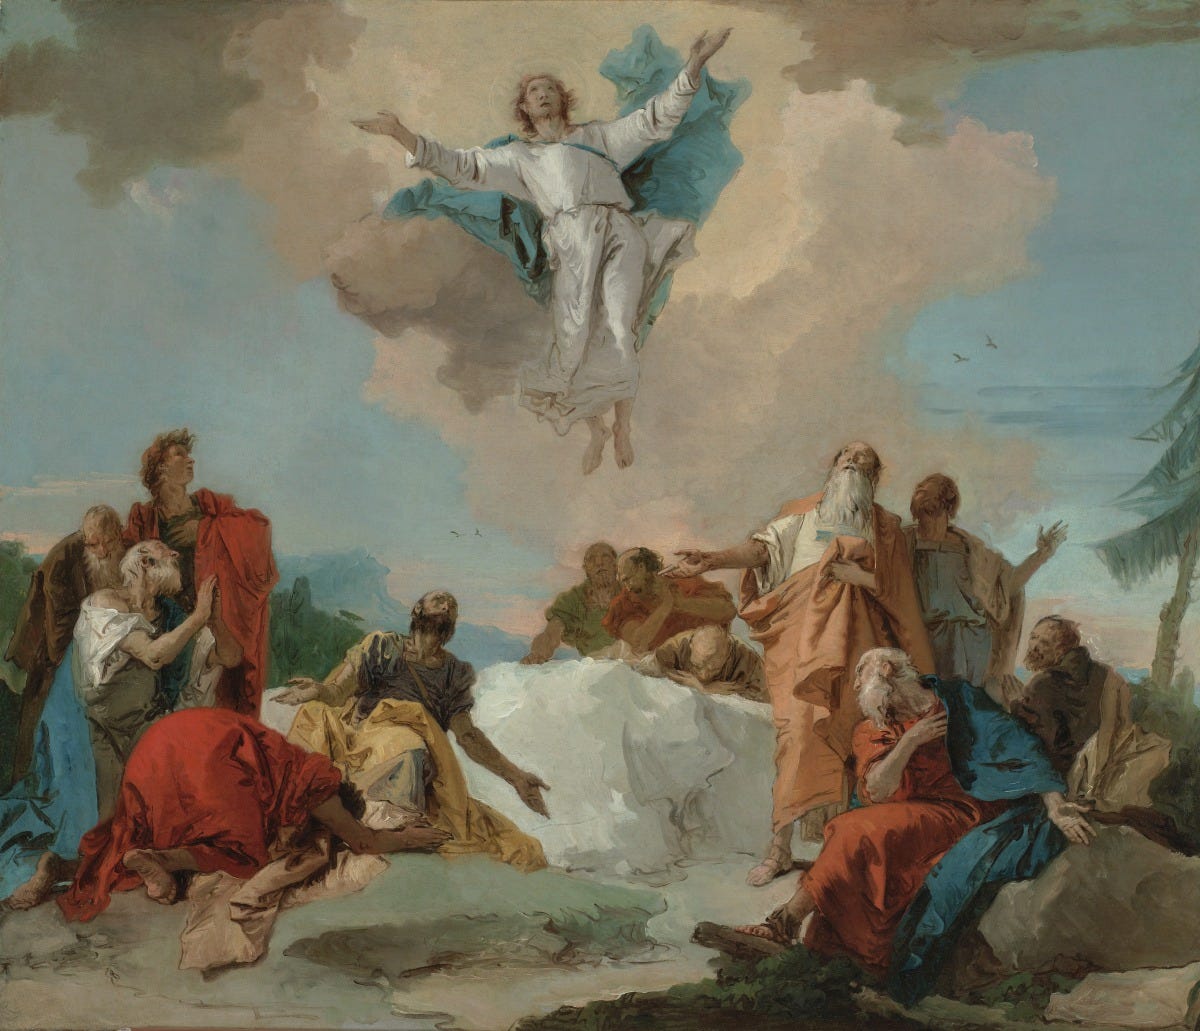 Tiepolo_-_The_Ascension_of_Christ,_ca._1745-50.jpg (1200×1031)